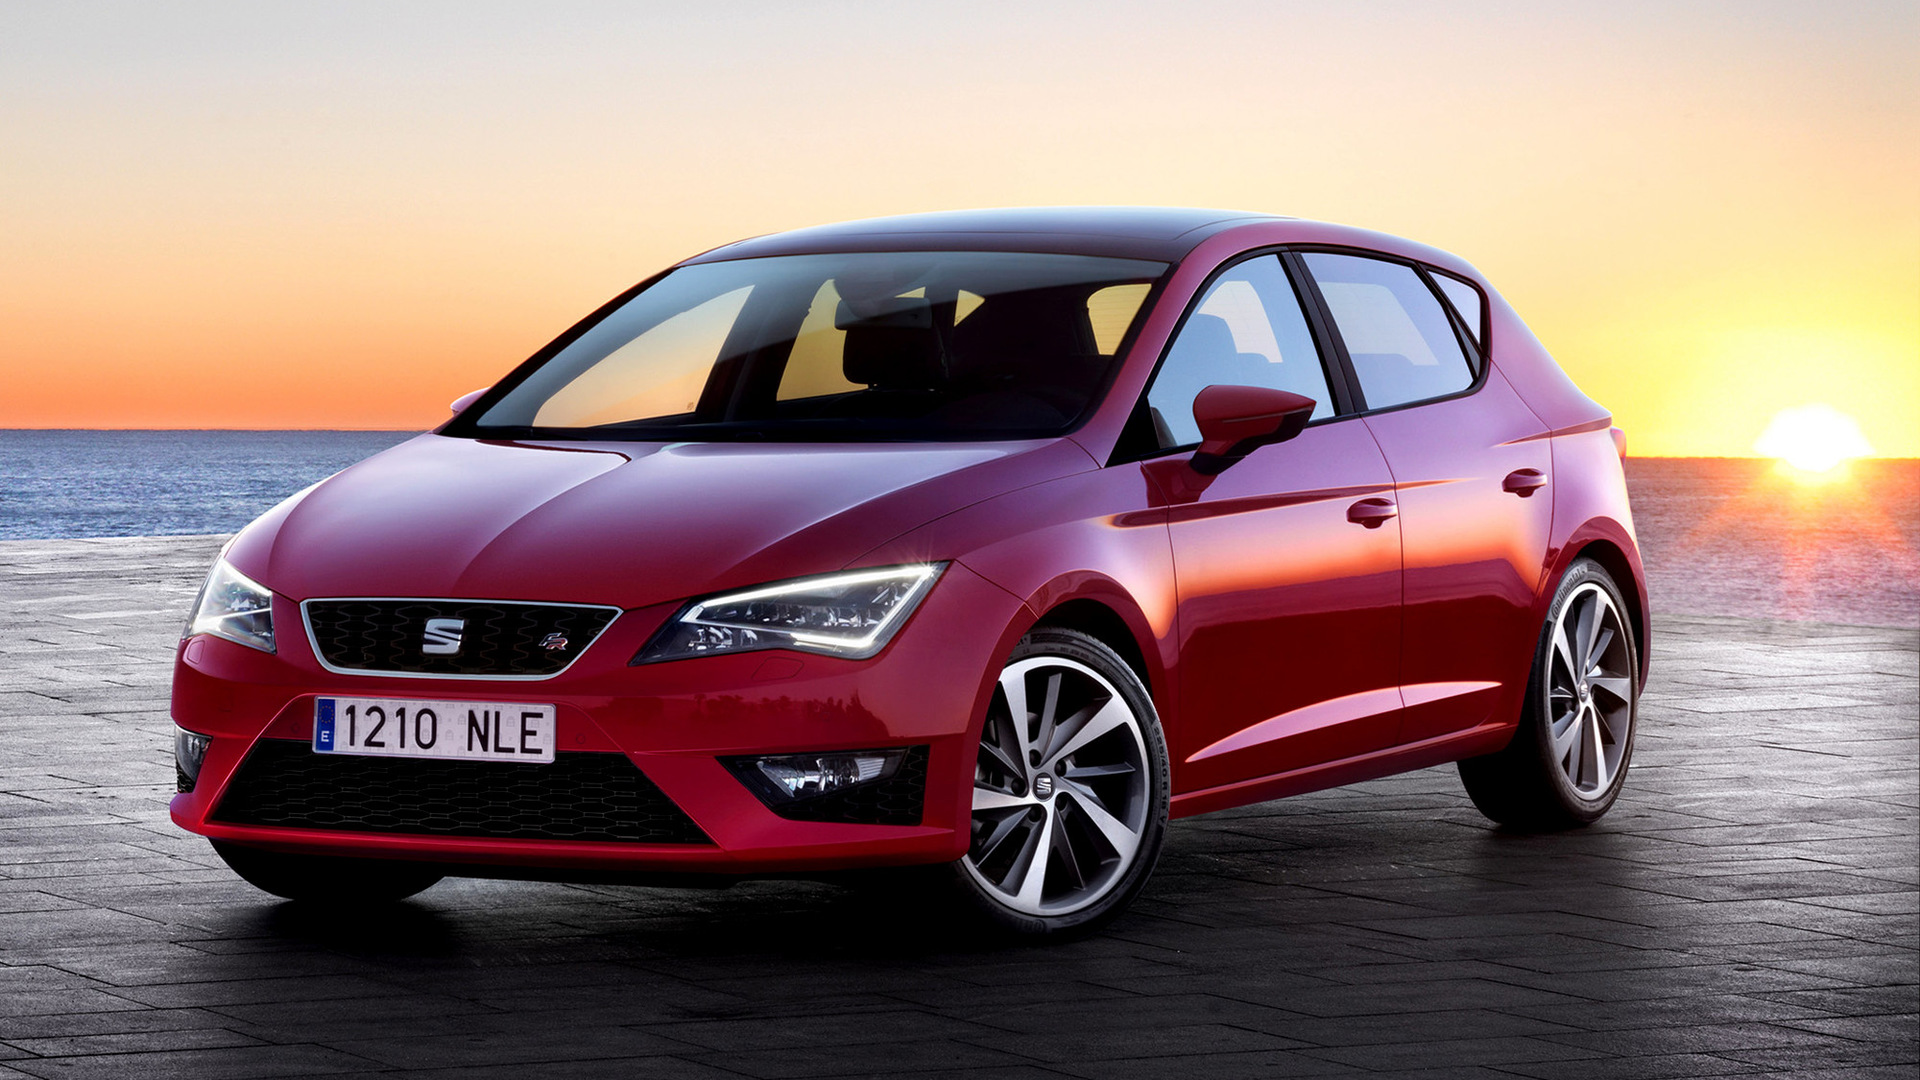 2012 Seat Leon FR - Wallpapers and HD Images | Car Pixel